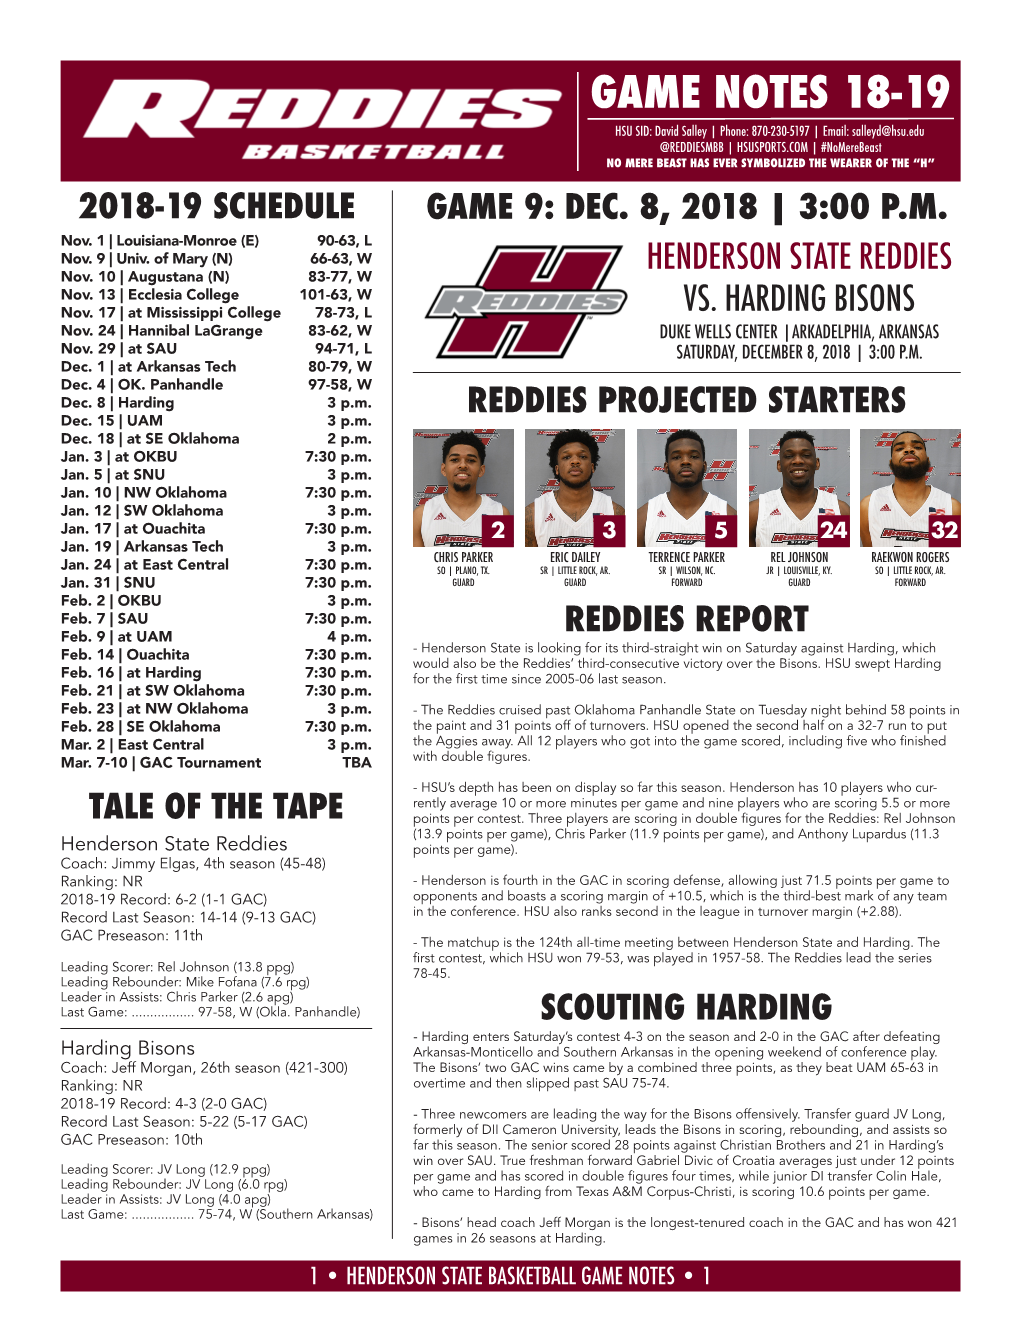 Game Notes 18-19